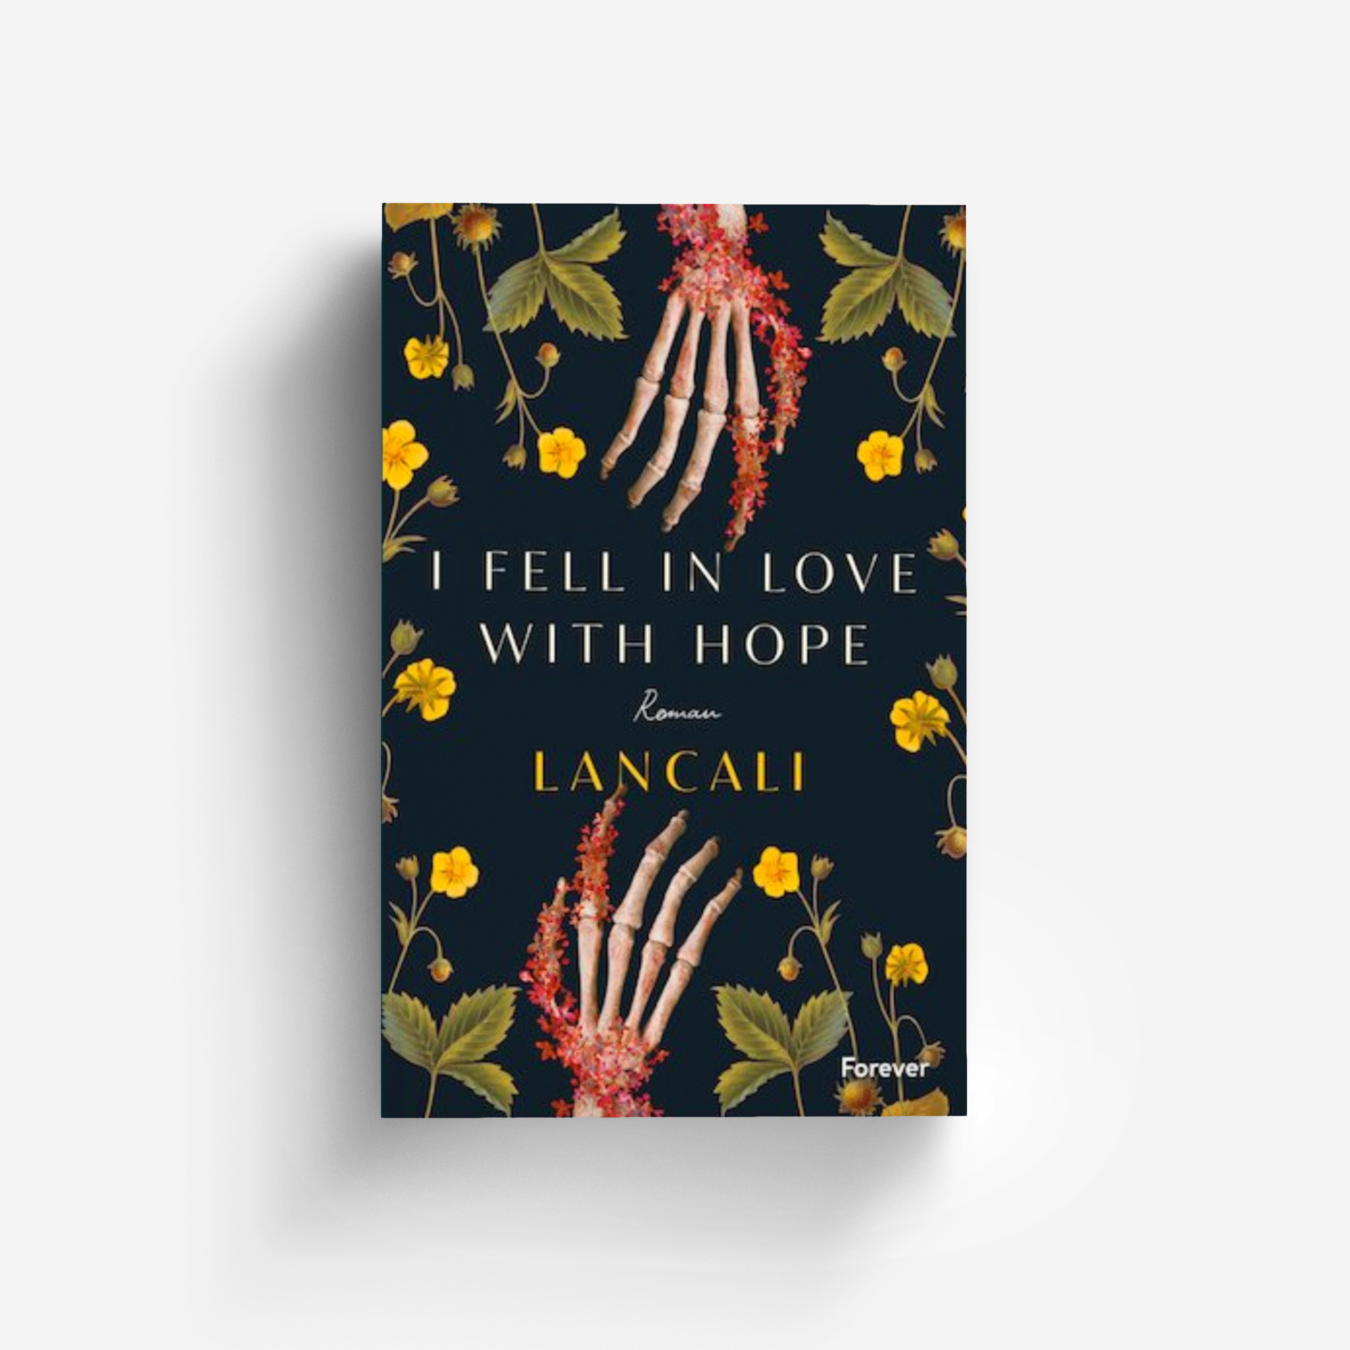 Buchcover von i fell in love with hope